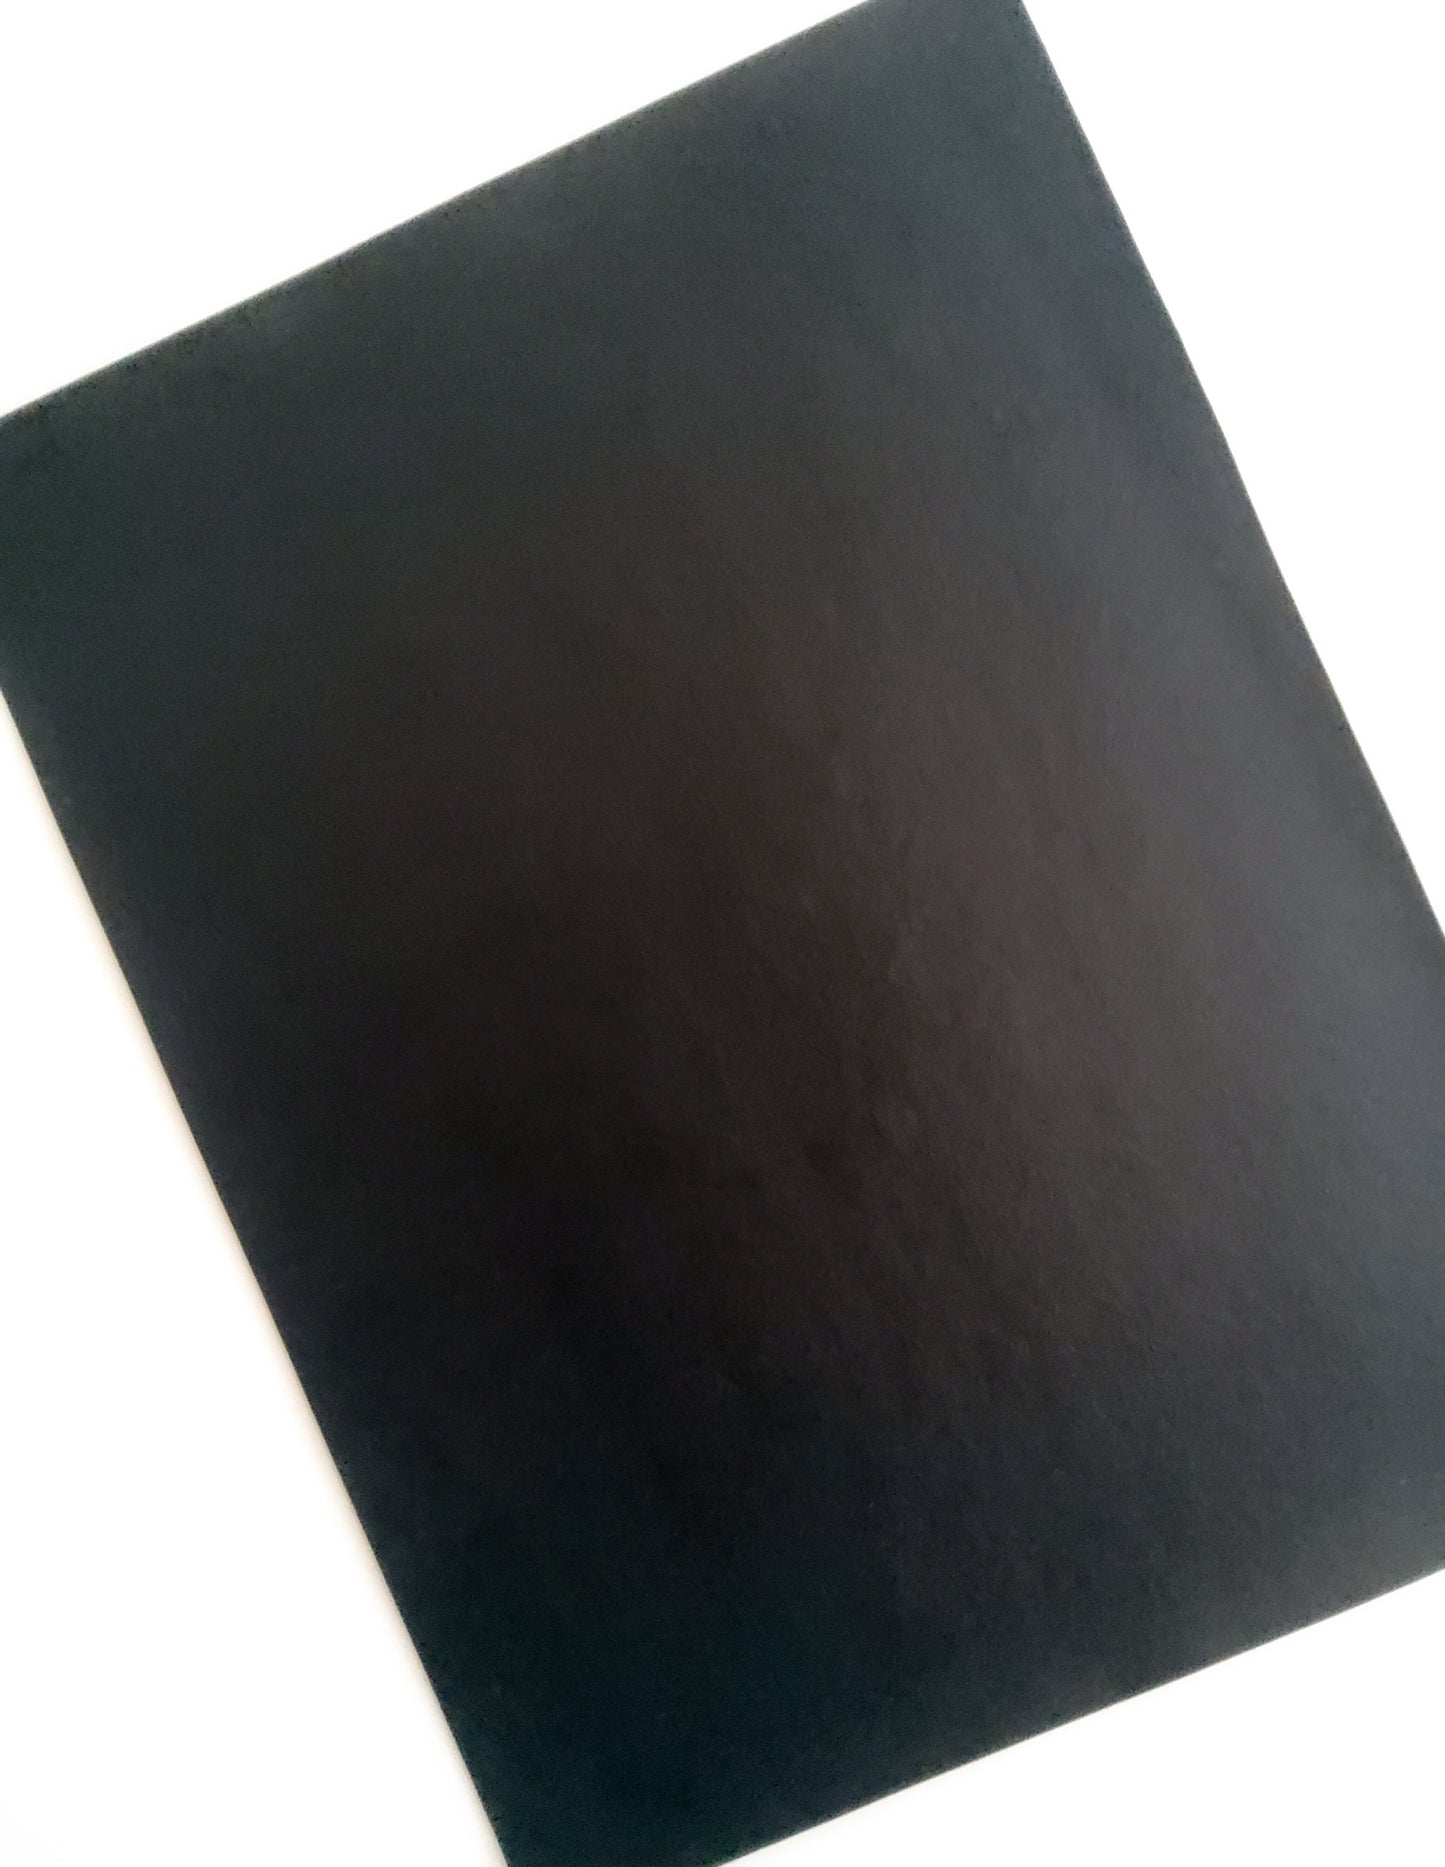 Black Smooth 9x12 faux leather sheet